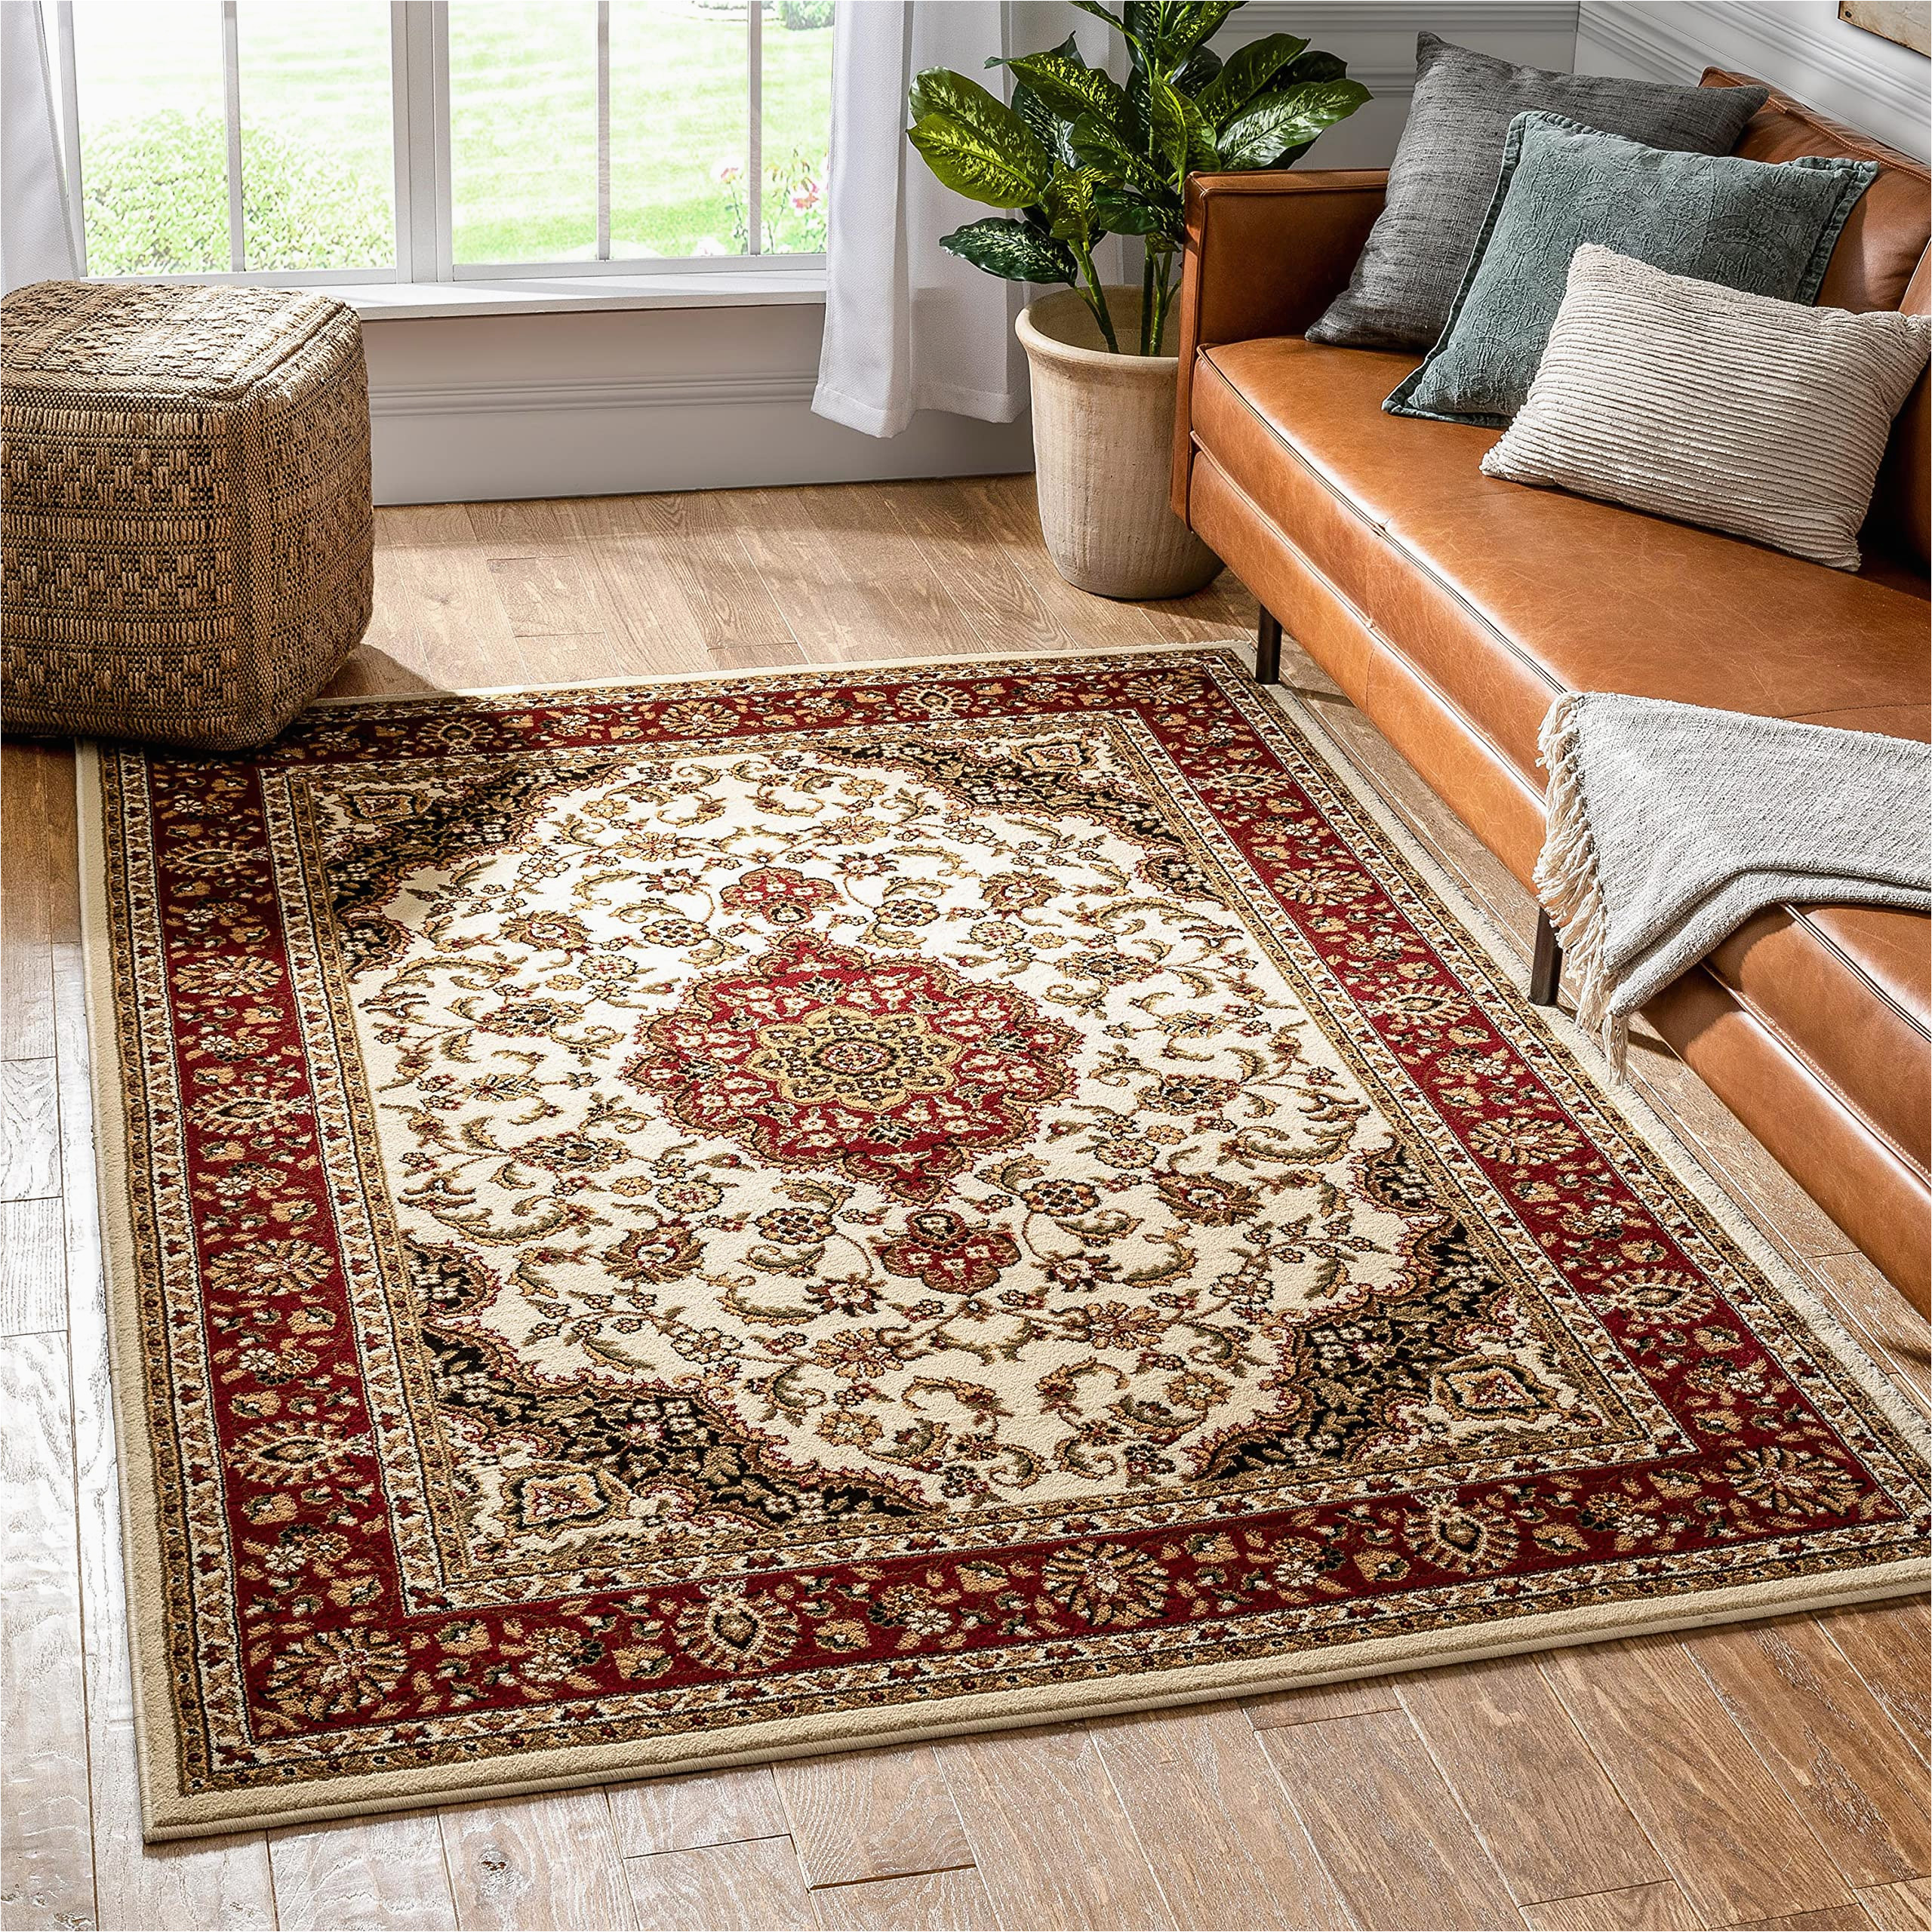 Traditional area Rugs for Dining Room Amazon.com: Noble Medallion Ivory Persian Floral oriental formal …